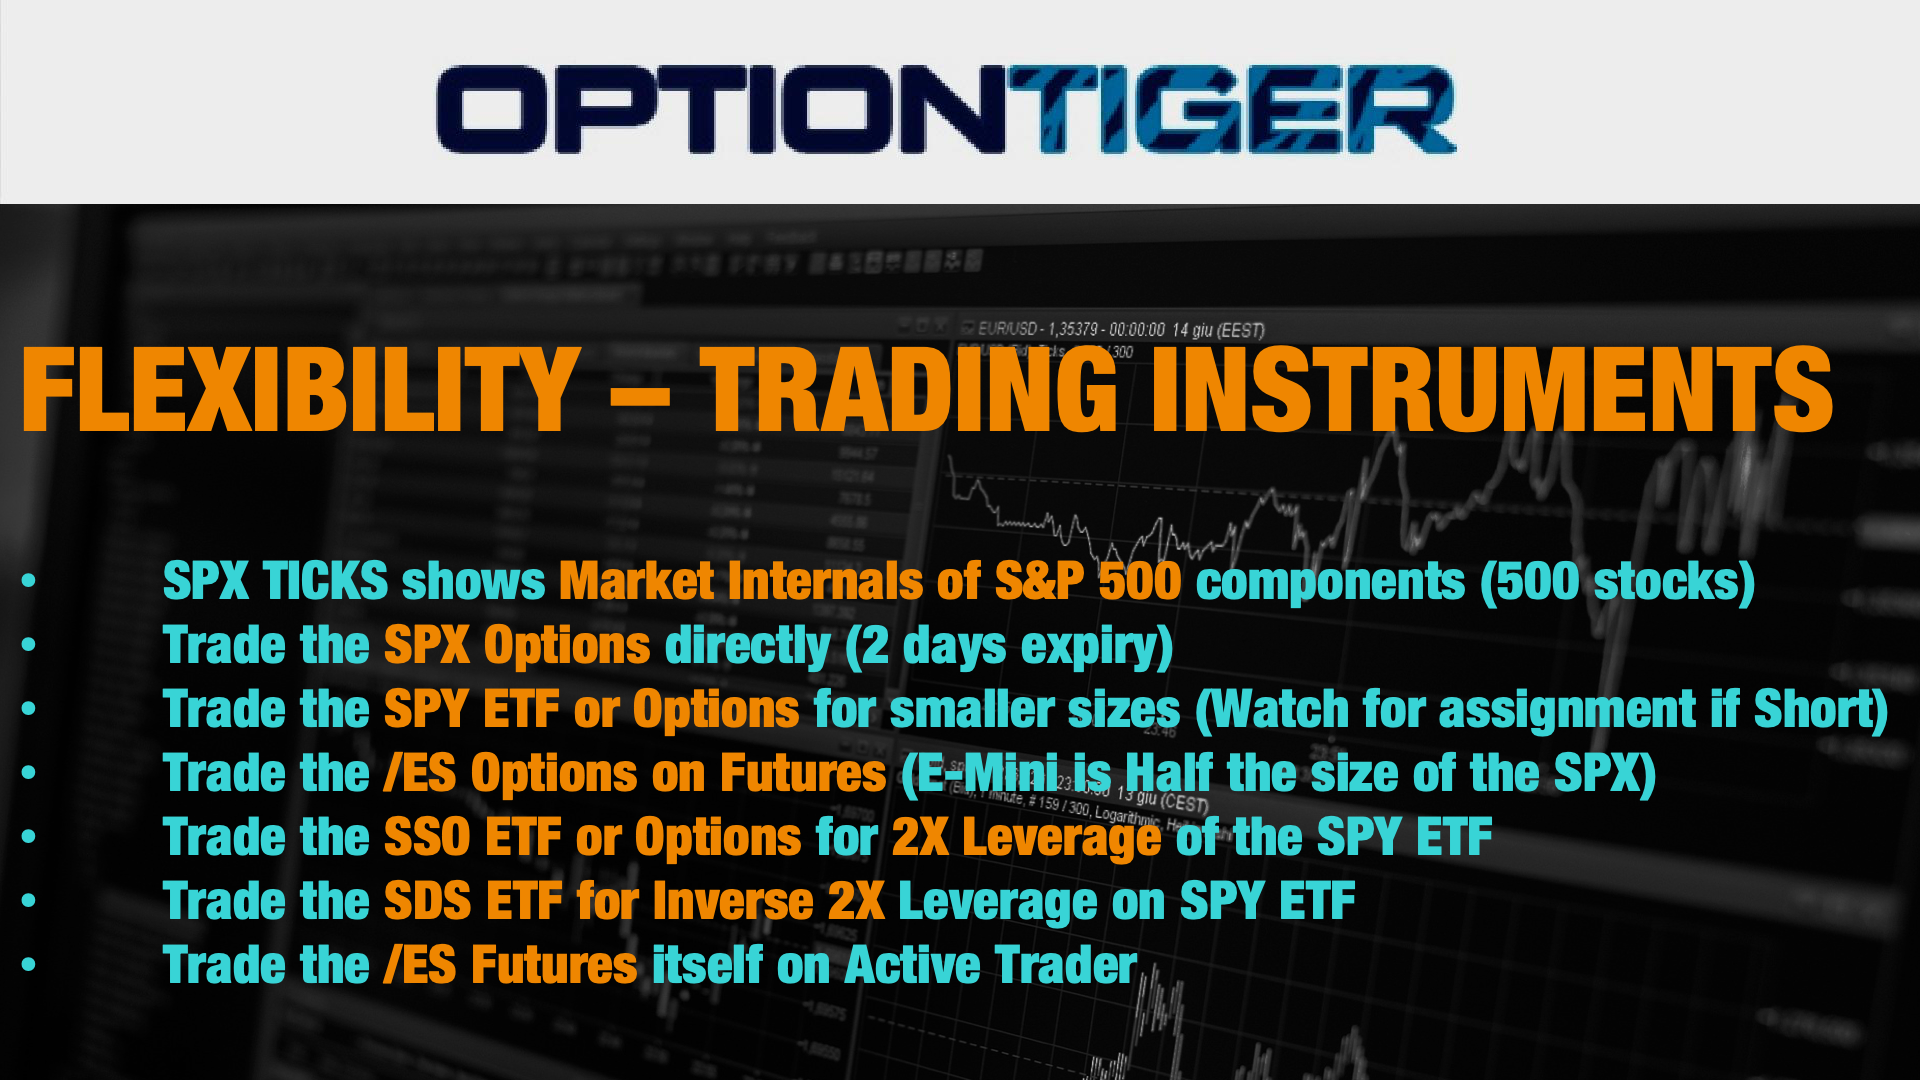 SPX Intraday trading instruments